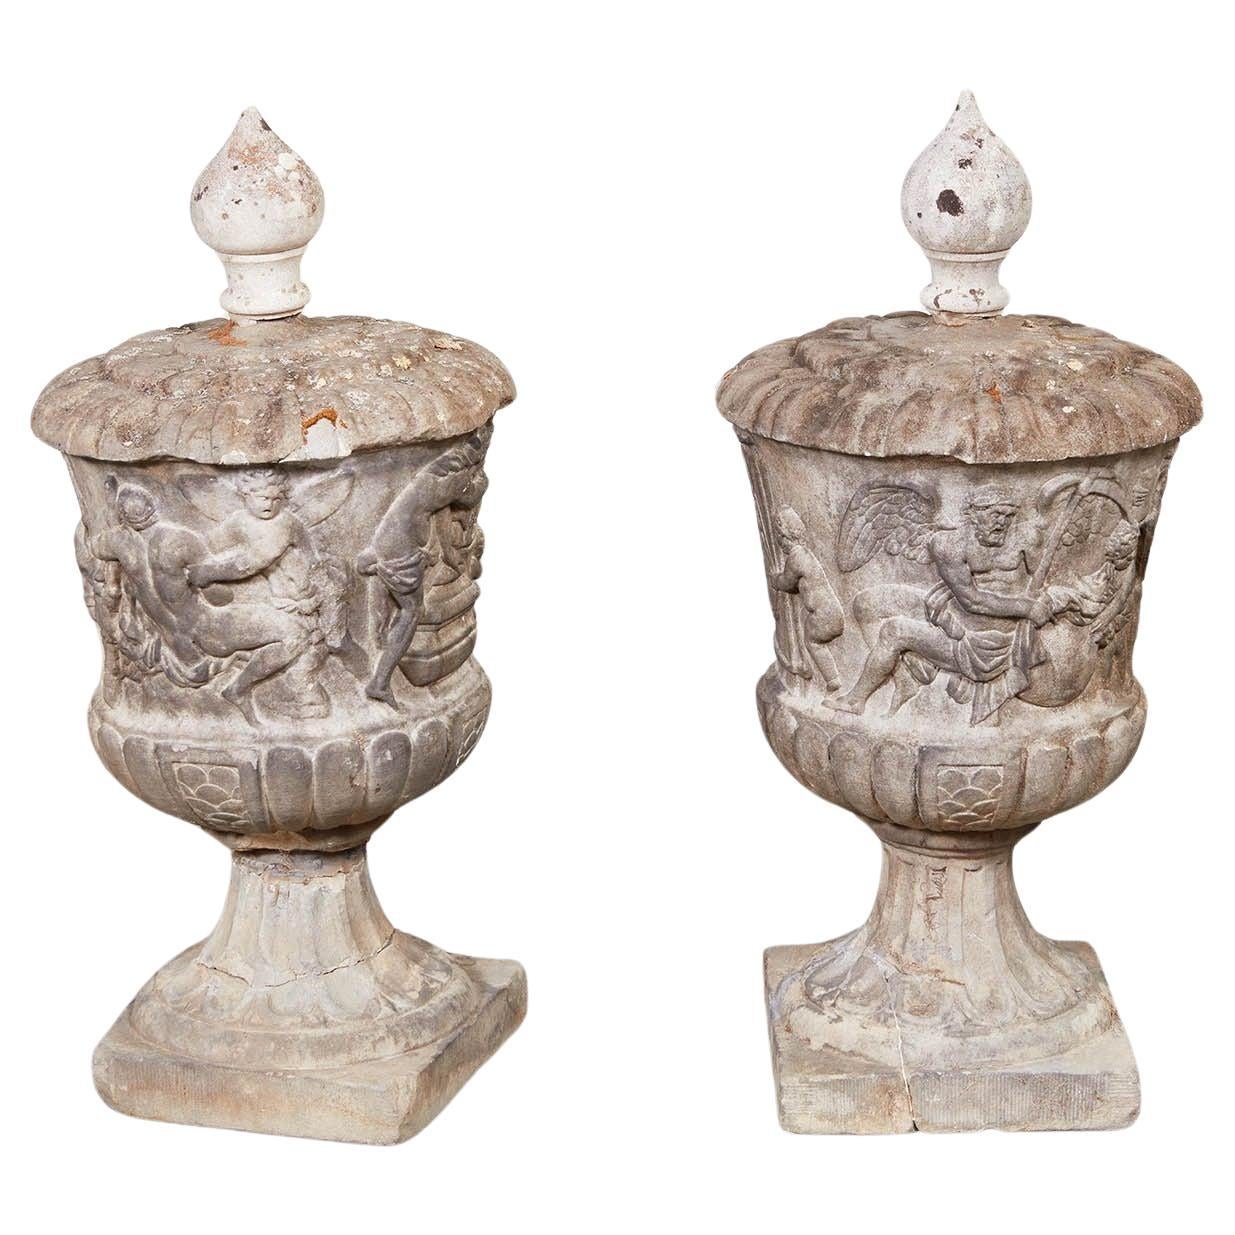 Rare and Important Pair of 17th c. Carved Marble Urns For Sale